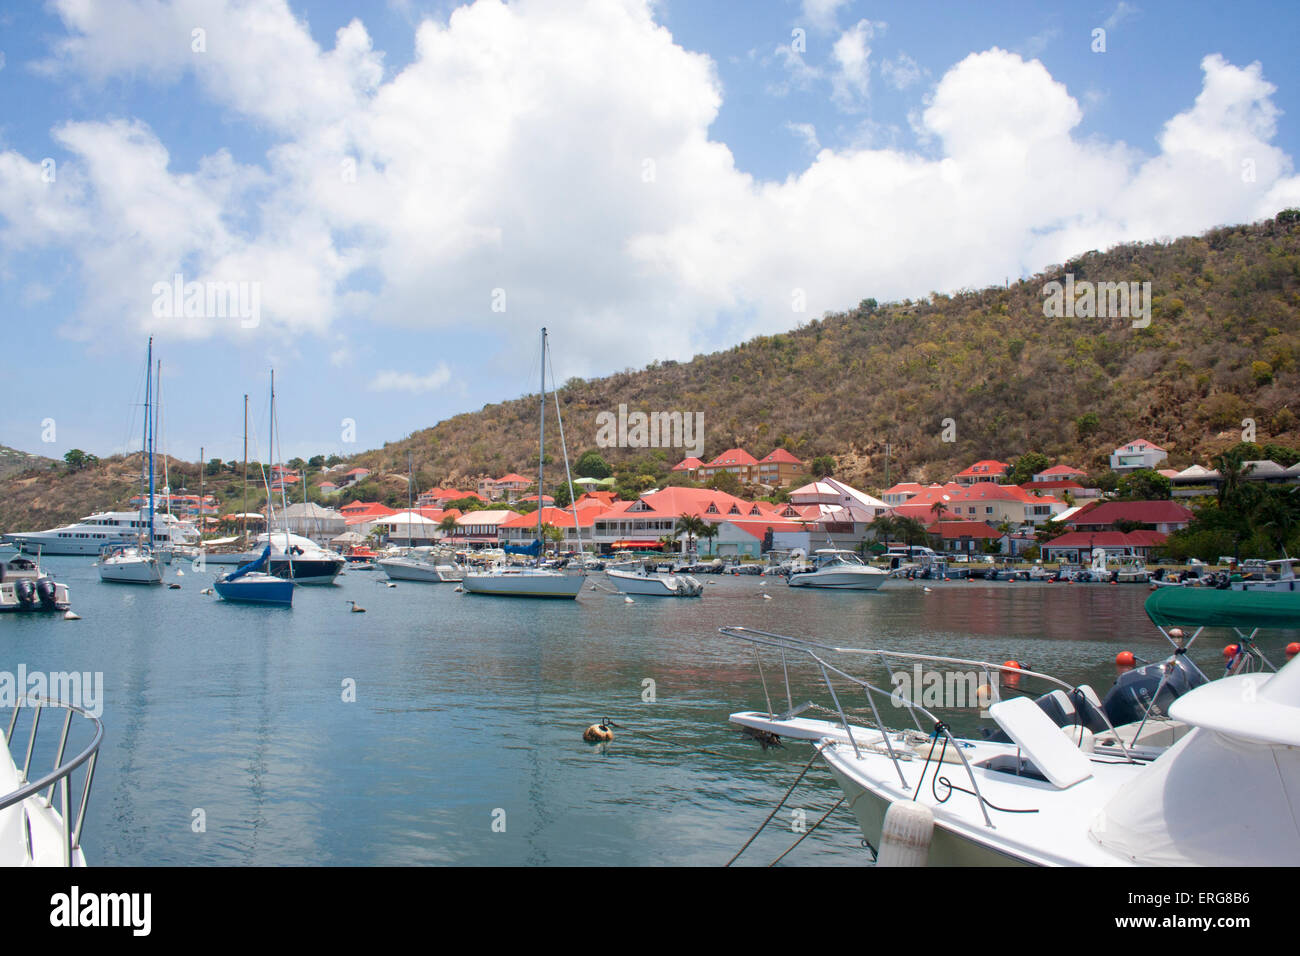 Boats moored in the harbor of Gustavia, St. Barts Stock Photo